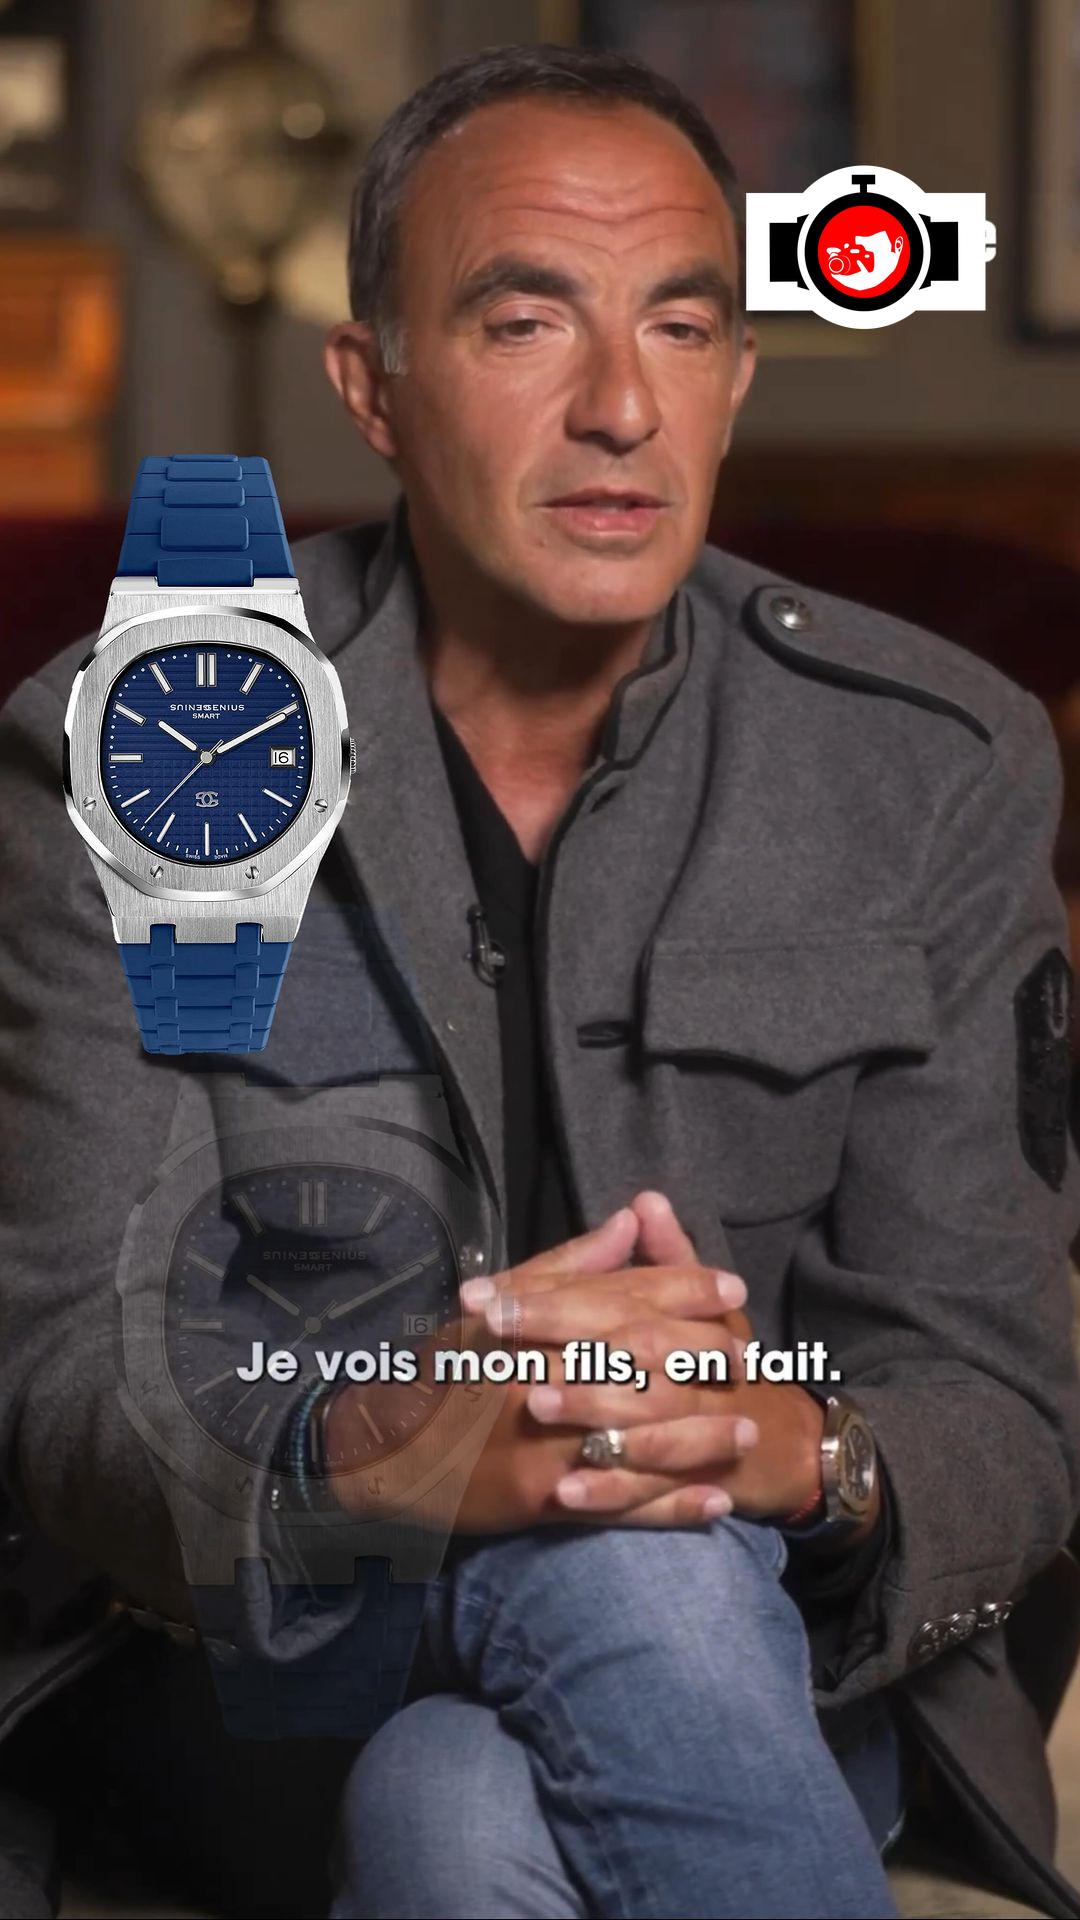 television presenter Nikos Aliagas spotted wearing a Genius Watches GSG-FR000543-SL